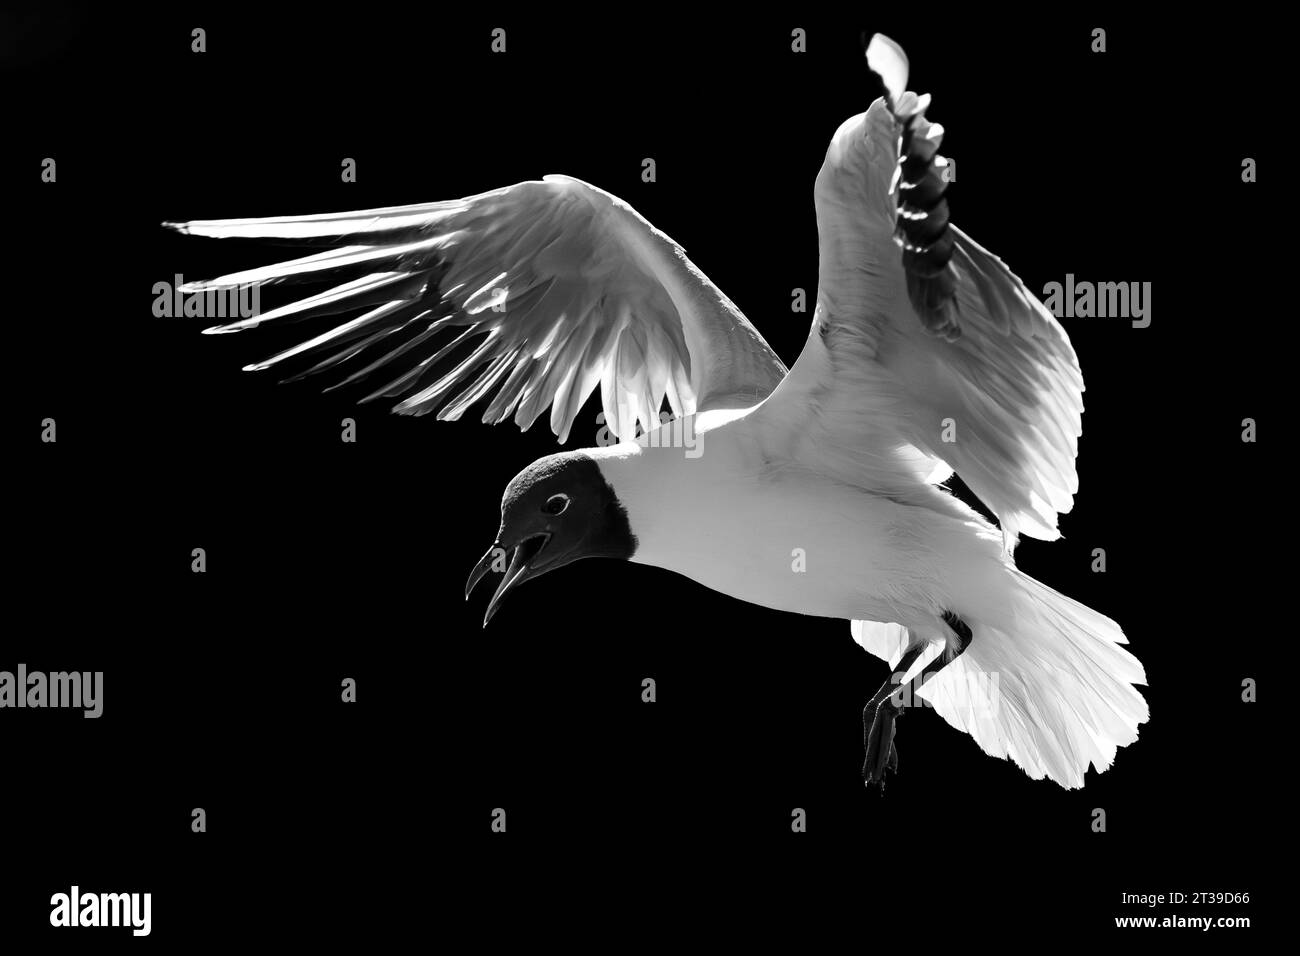 Side view of small black headed seagull with white plumage and opened mouth flying alone in Castilla La Mancha Spain in light against black background Stock Photo